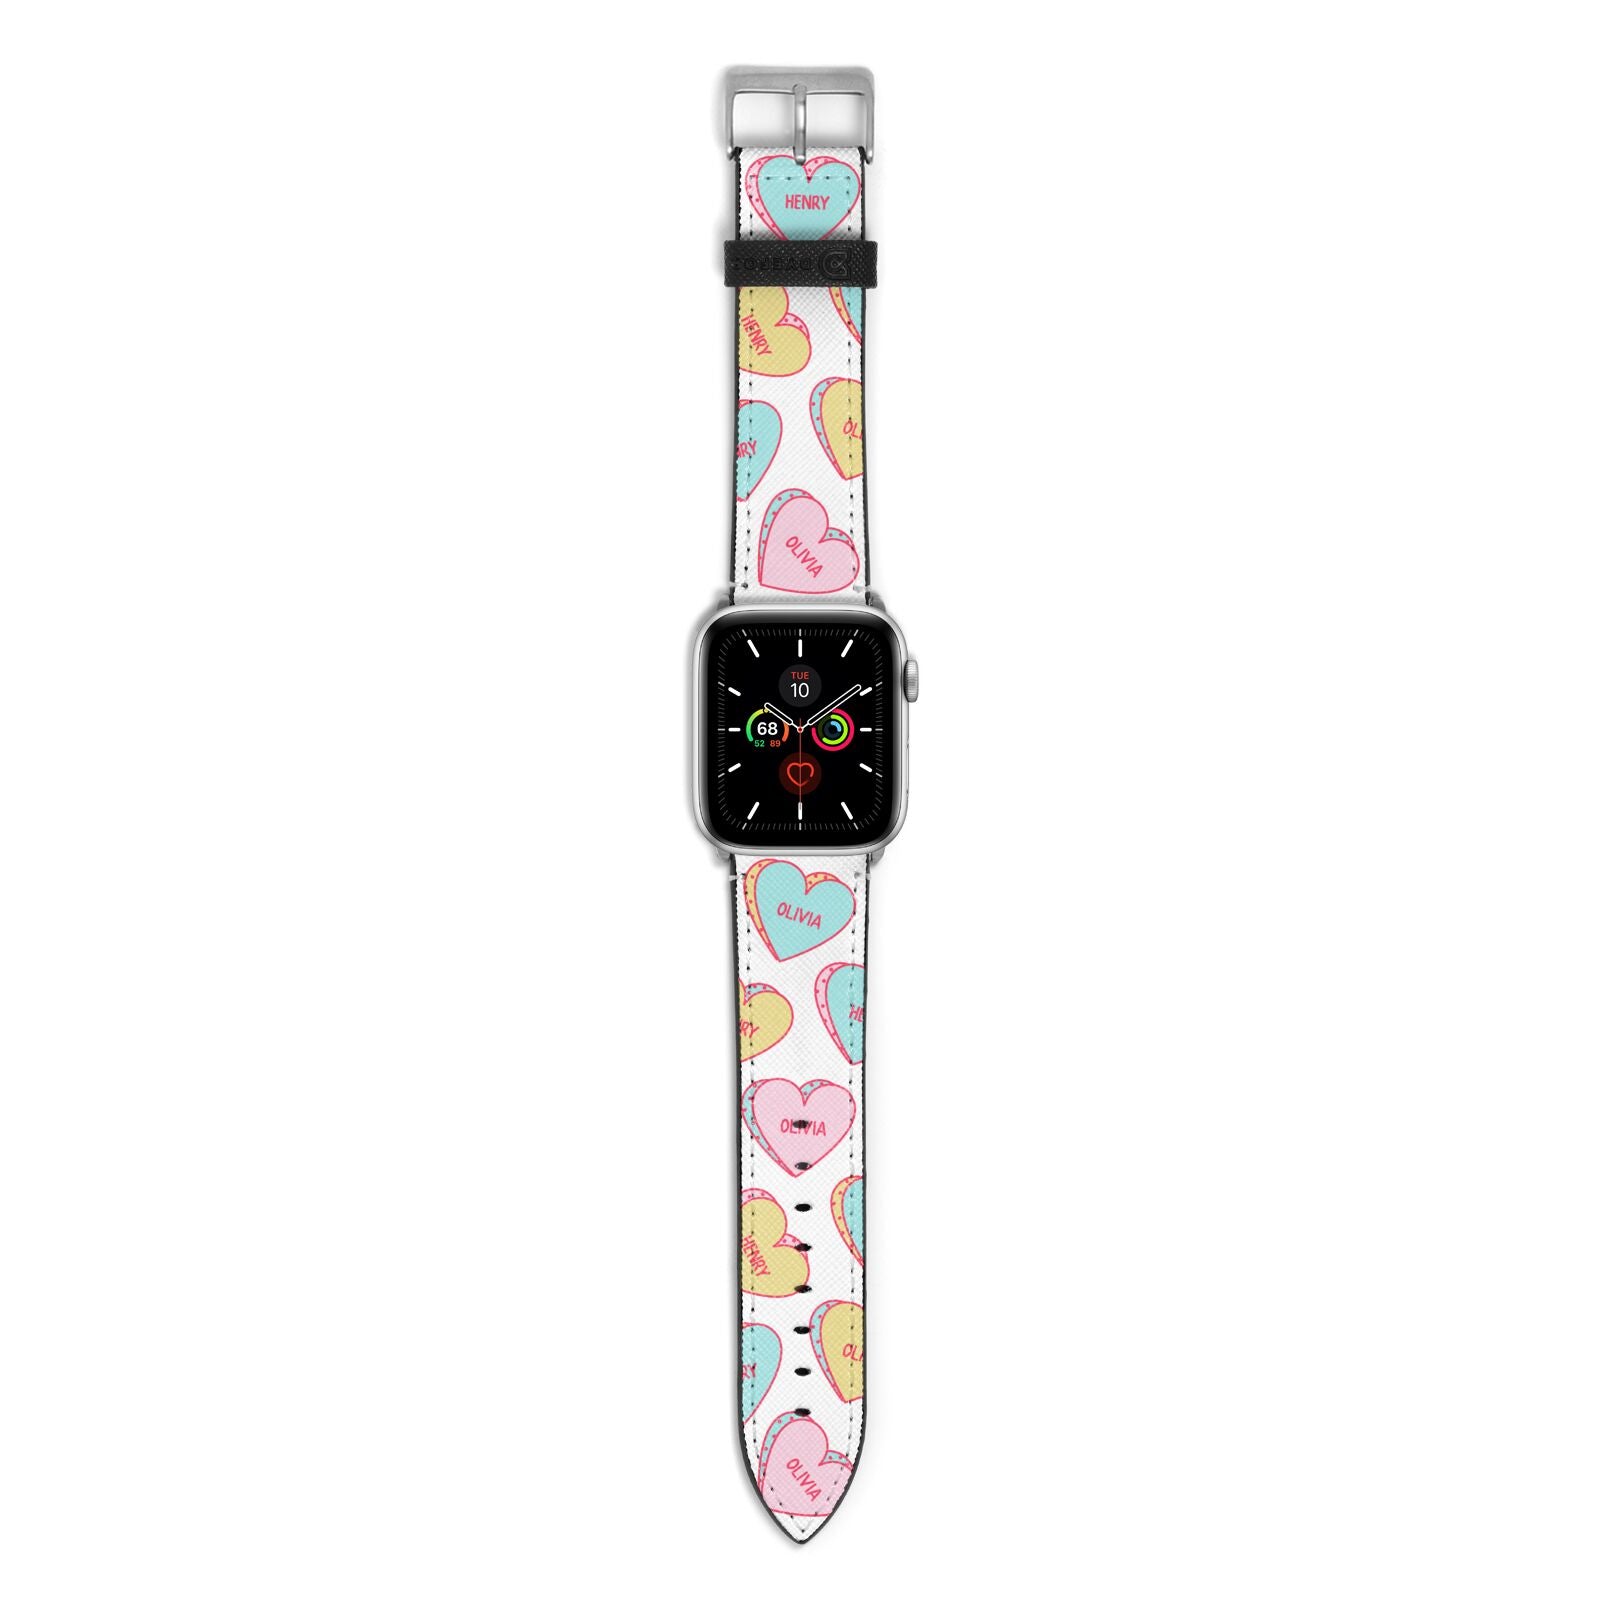 Personalised Heart Sweets Apple Watch Strap with Silver Hardware